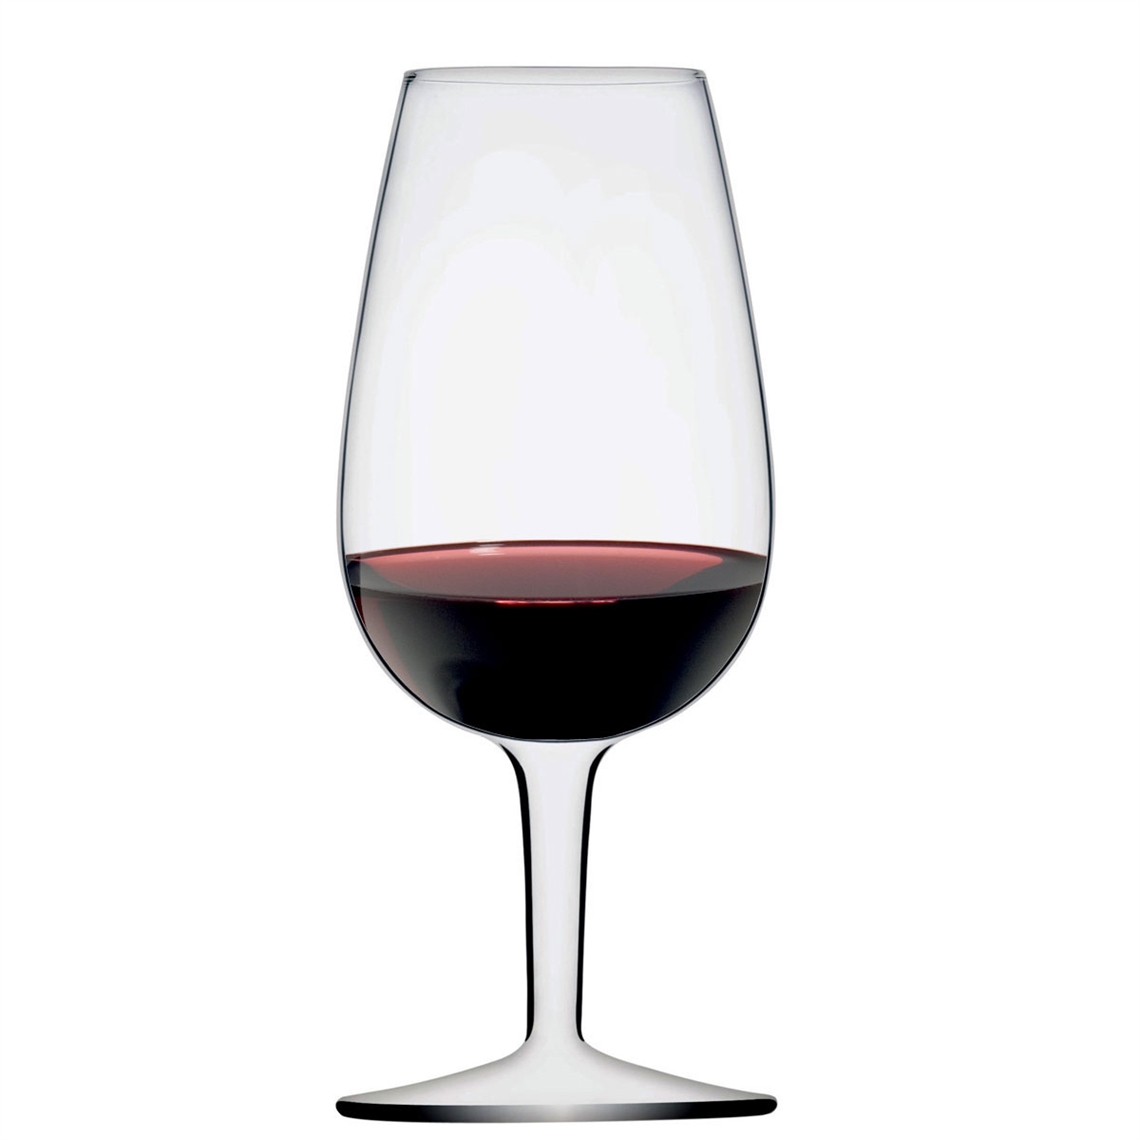 View more chablis wine glasses from our Wine Tasting Glasses range